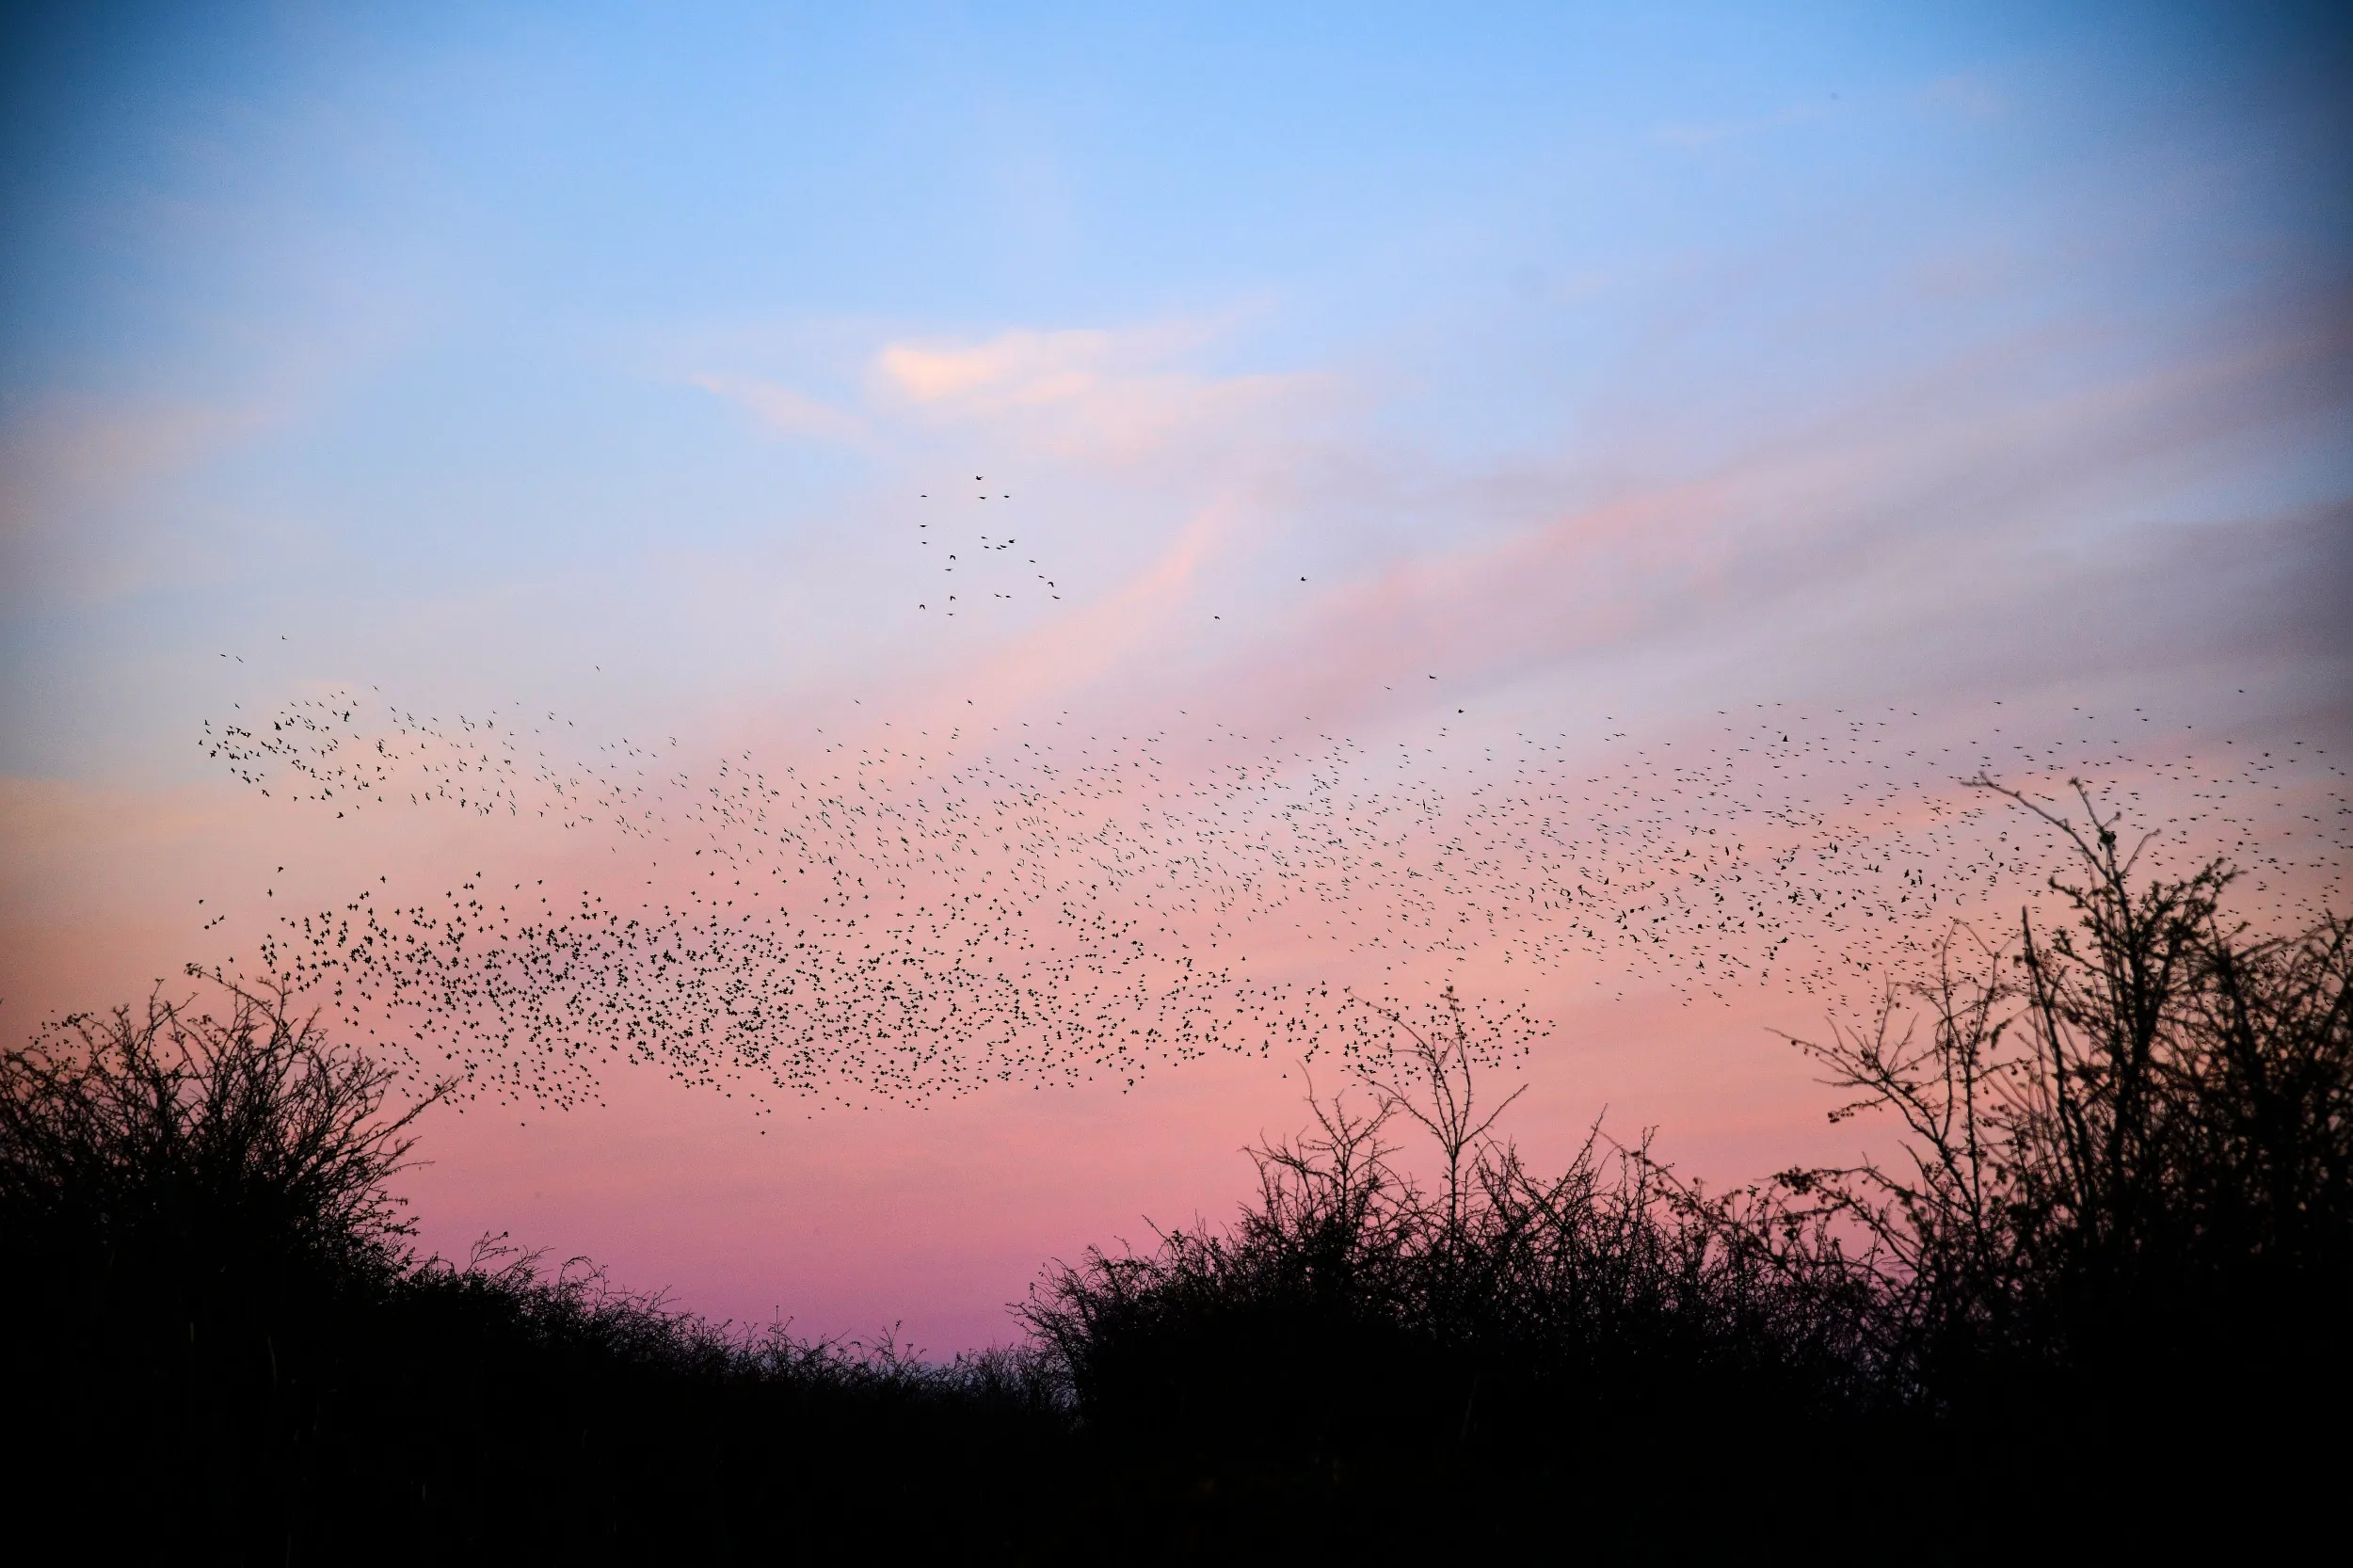 A Starling murmuration against a sunset sky on a winter's dusk.